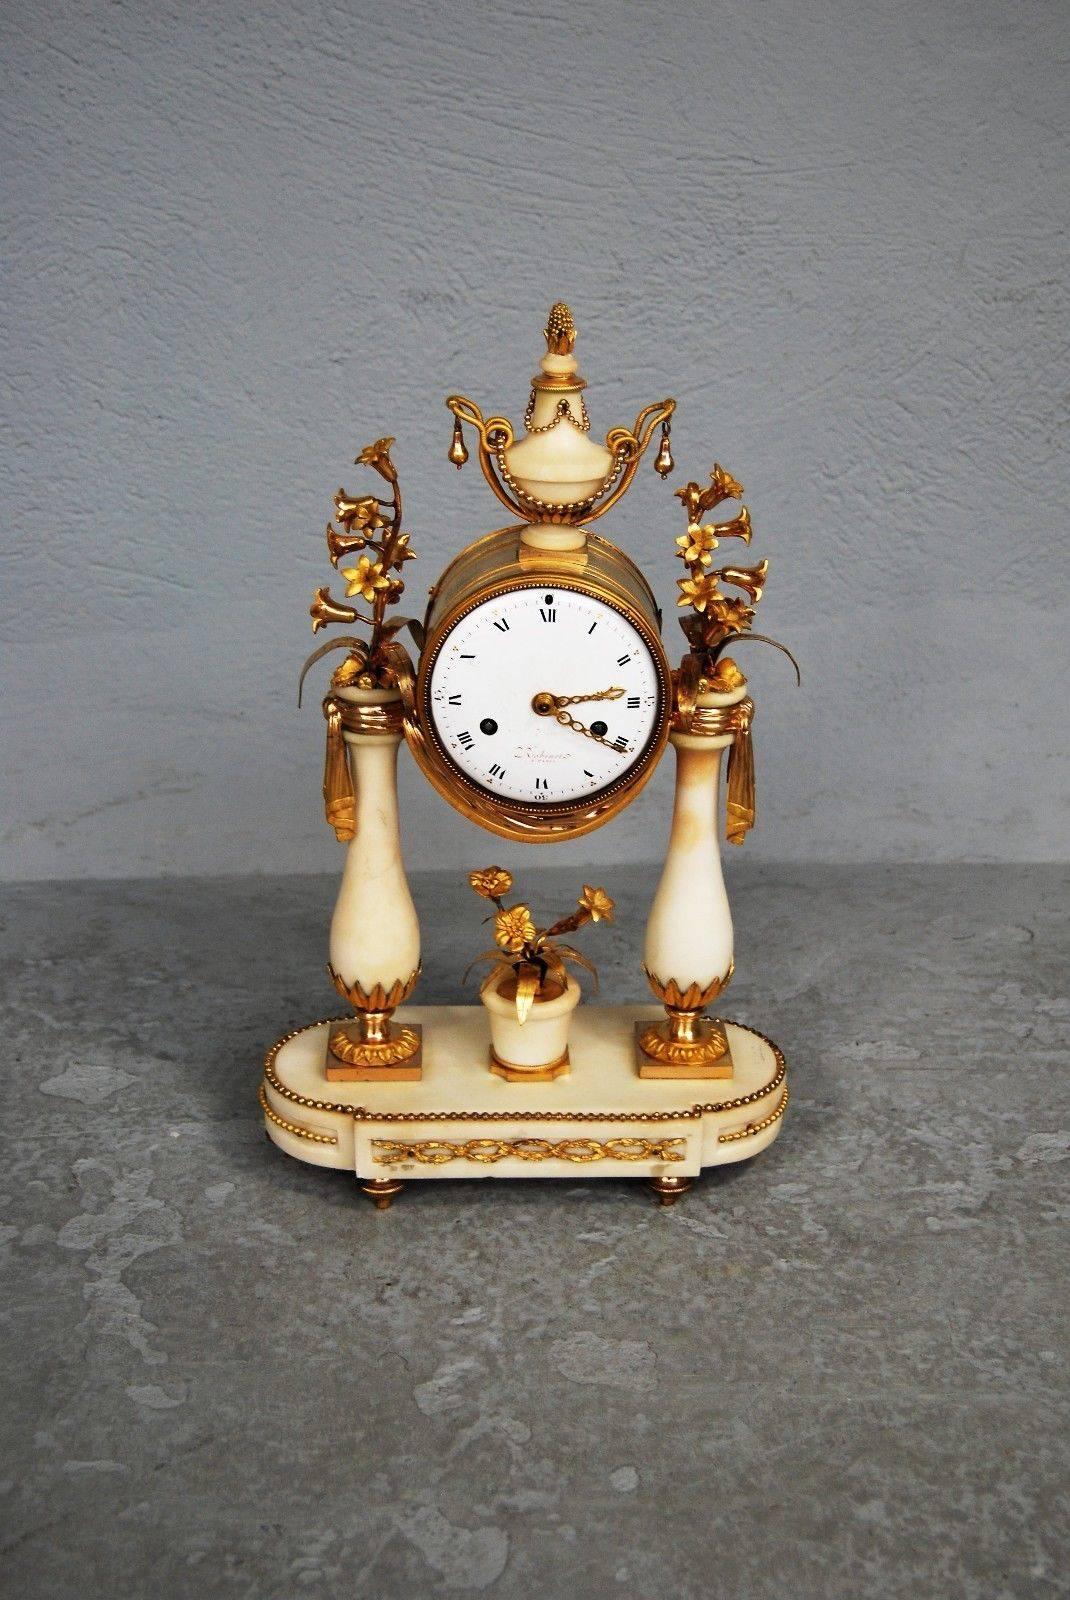 Marble and gilded bronze mantel clock, with decorative flowers.
Beautiful object in working order.
Dimensions: Height 46cm, width 27cm, depth 13cm.
     